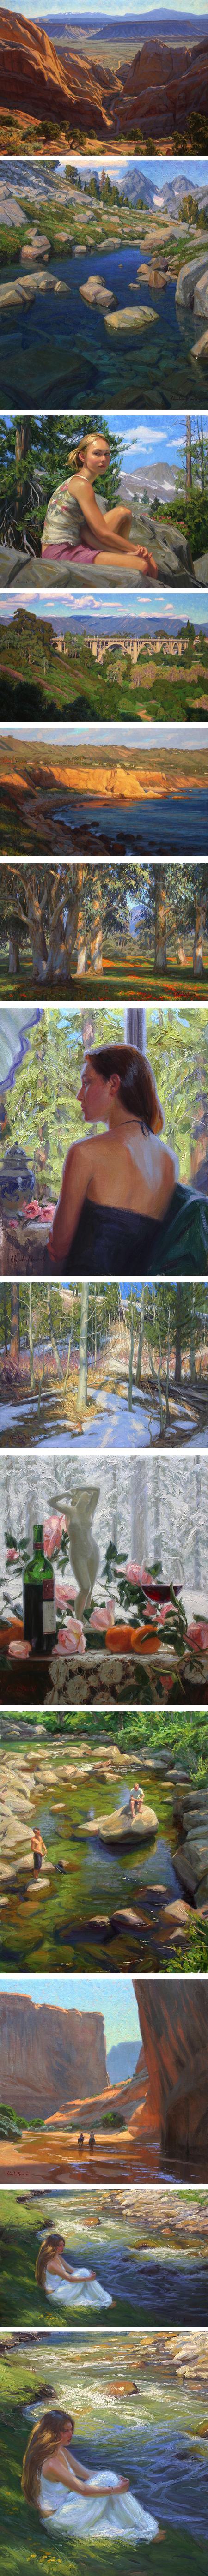 Charles Muench, paintings of the Sierra Nevadas and southwest